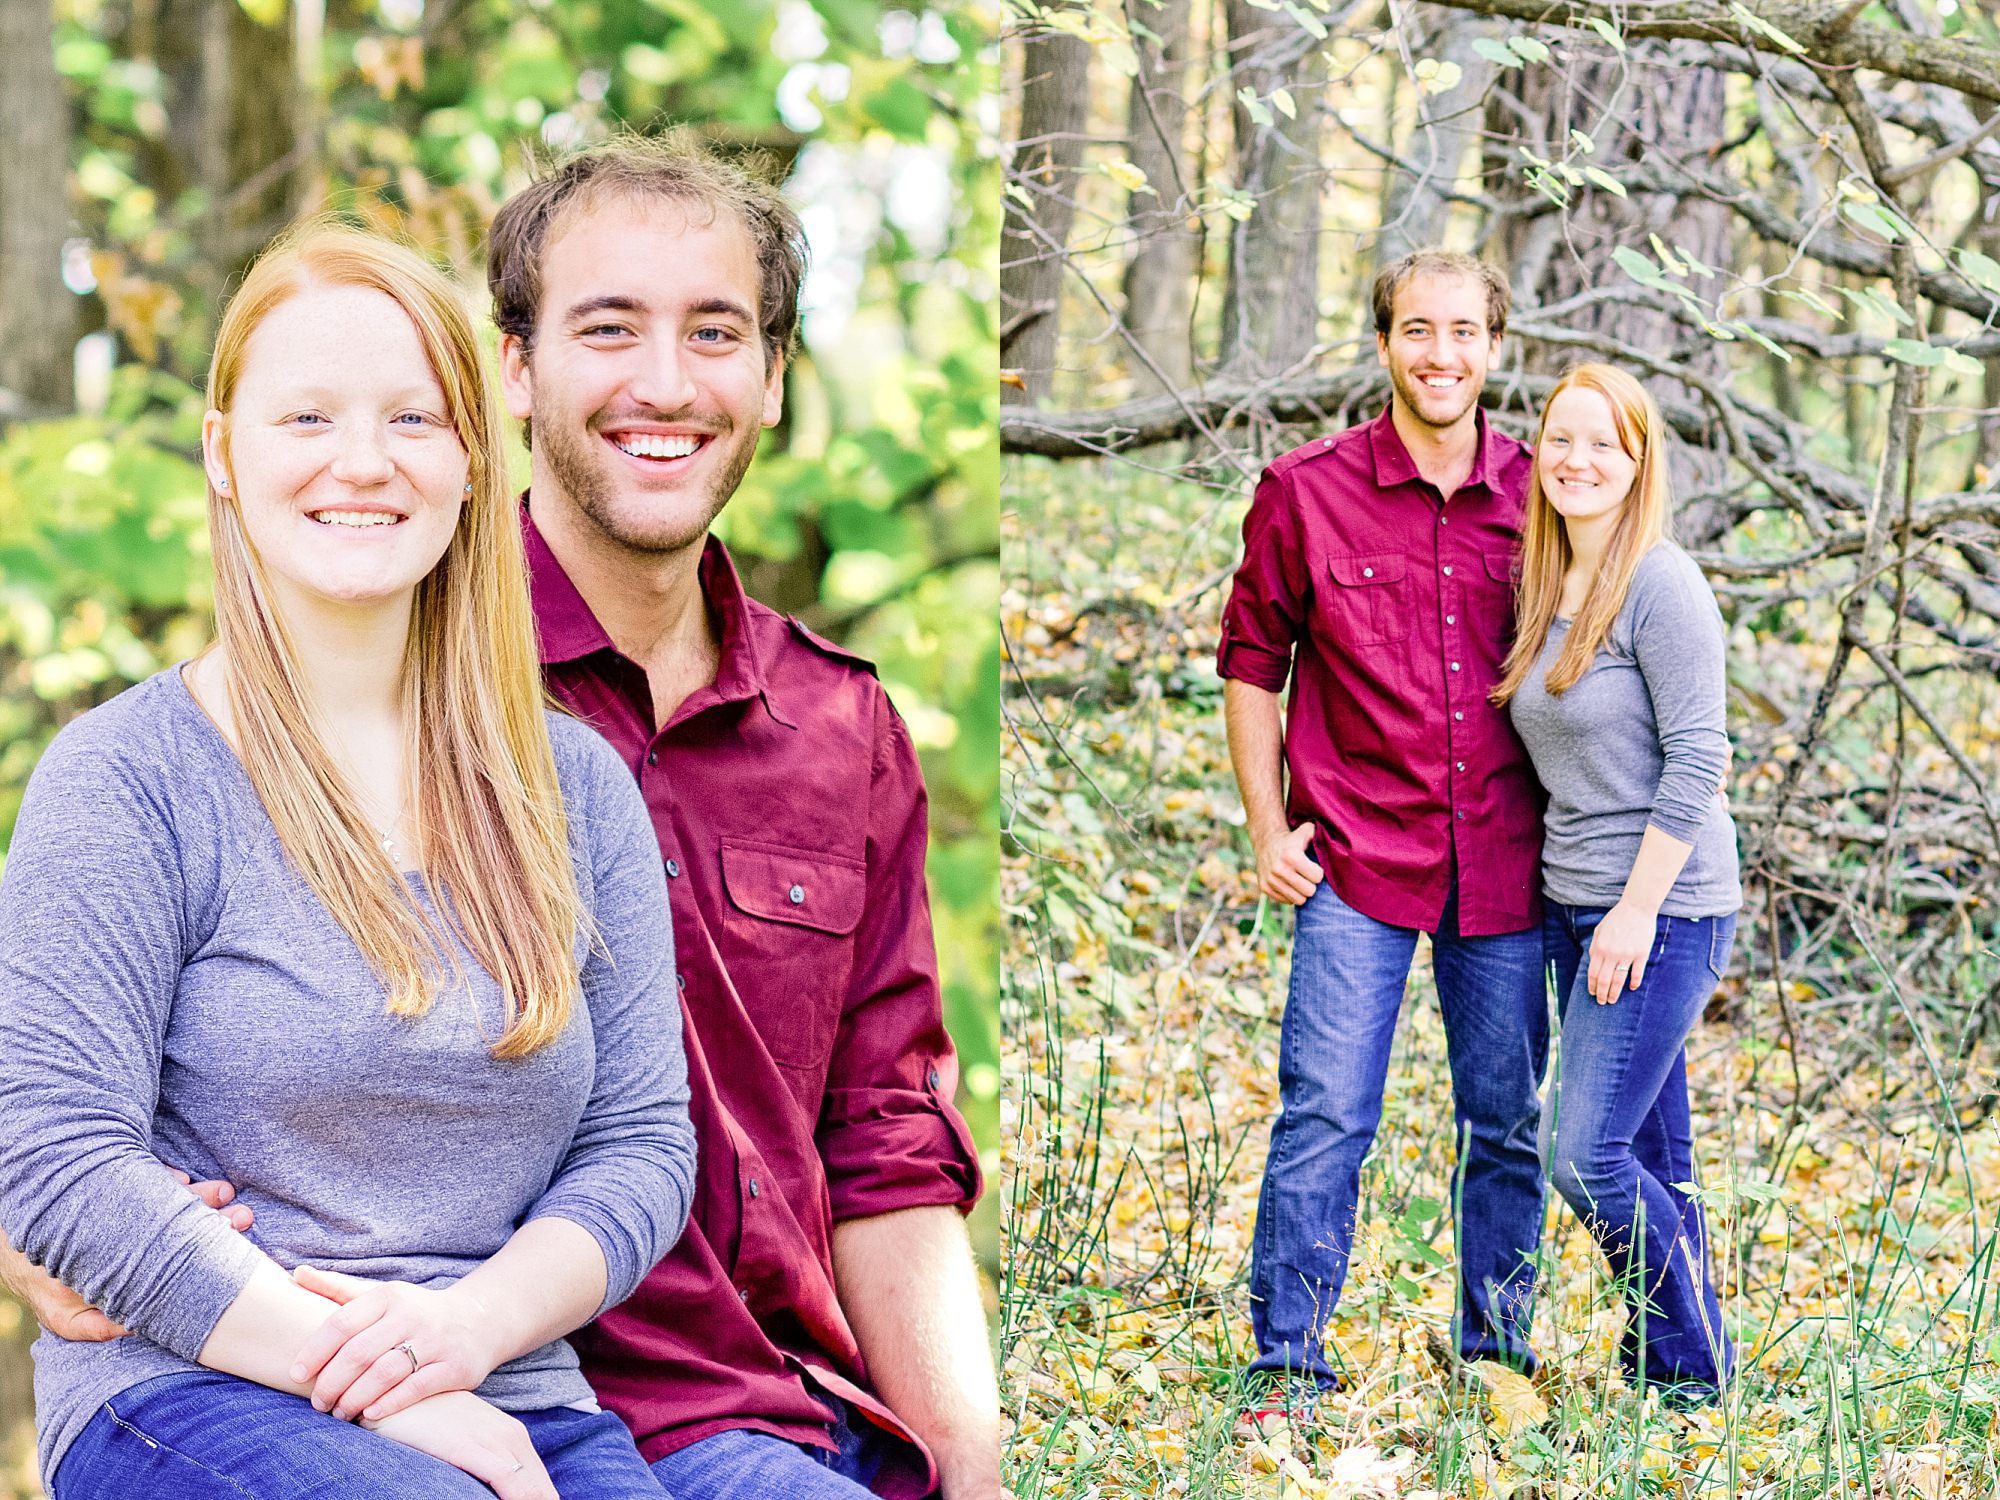 Buffalo River State Park Engagement Session in maroon and grey